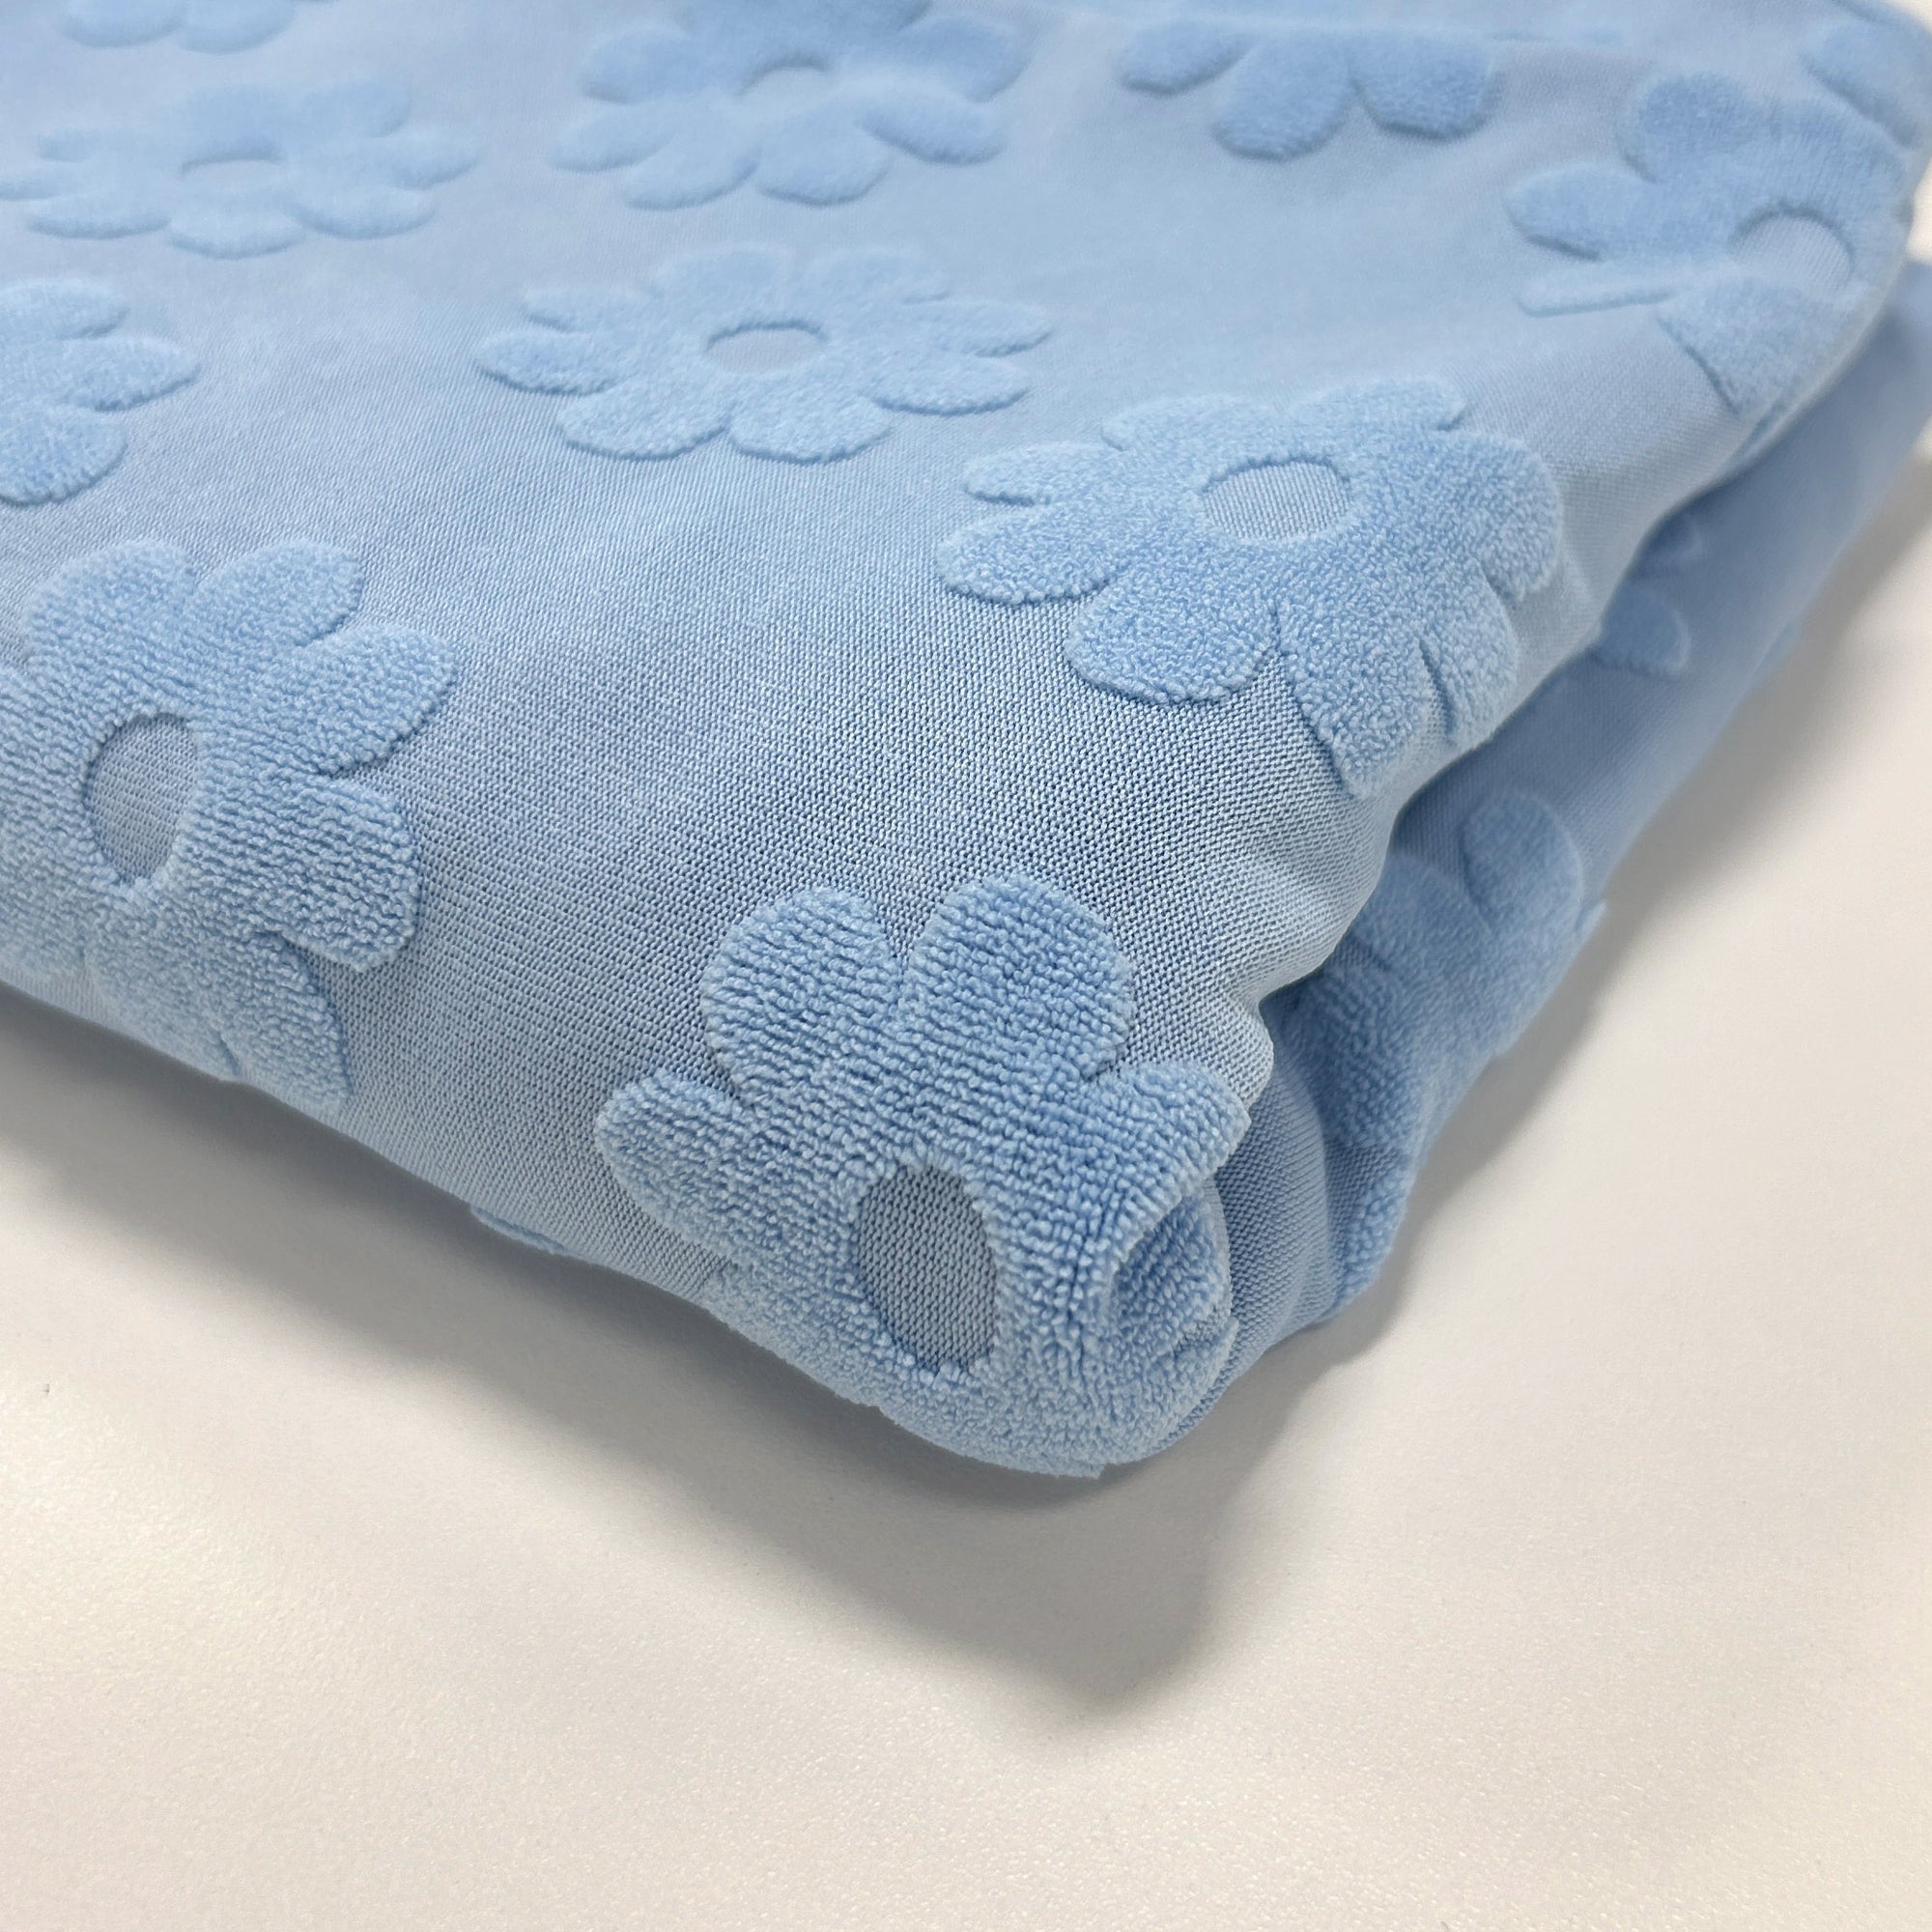 Solid Light Blue Daisy Stretch Jacquard Loop Terry Fabric